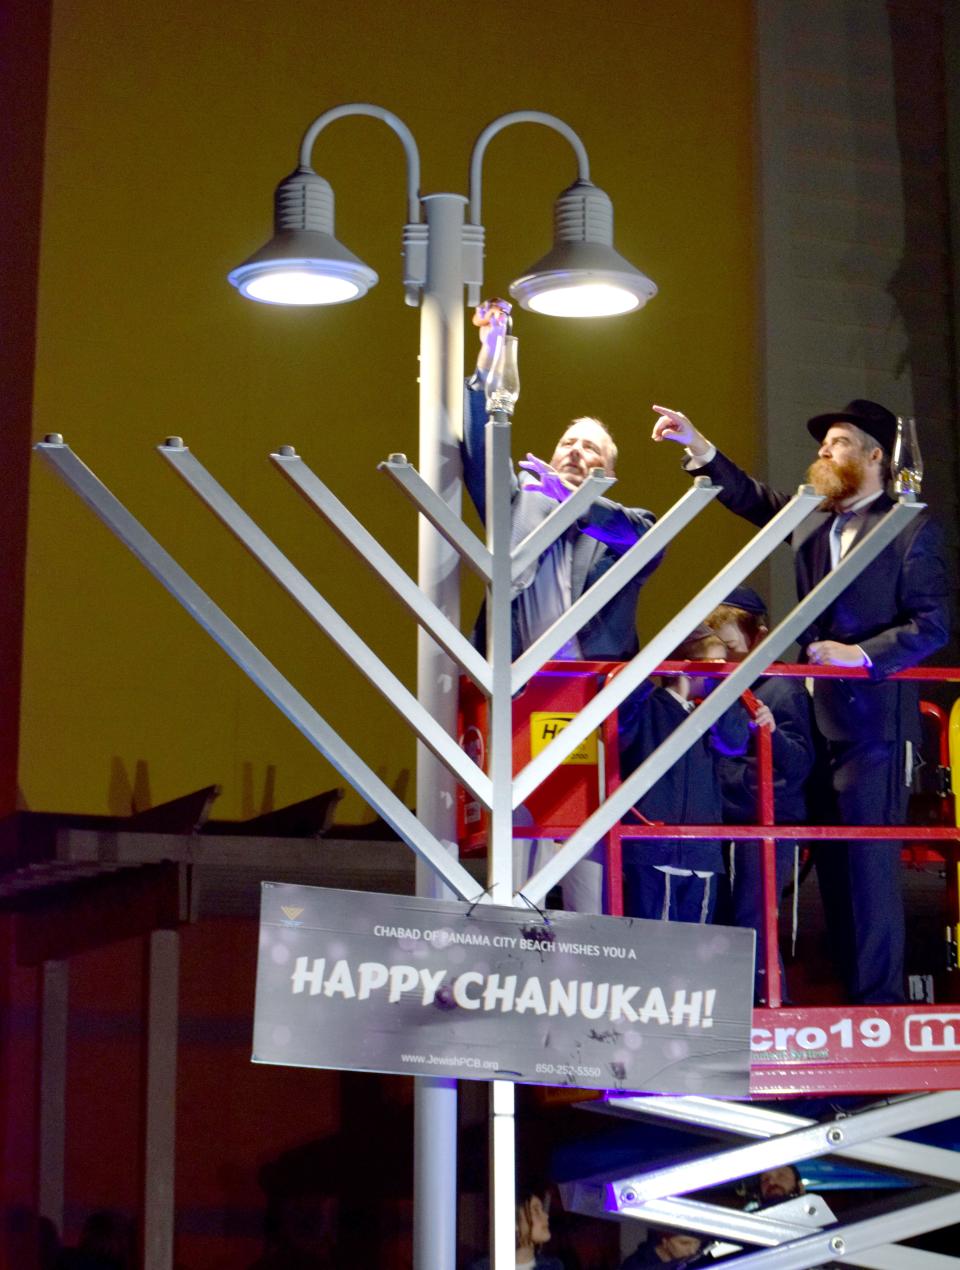 More than 150 people attended the Chabad of Panama City Beach's Grand Menorah Lighting Event on Thursday at Pier Park.